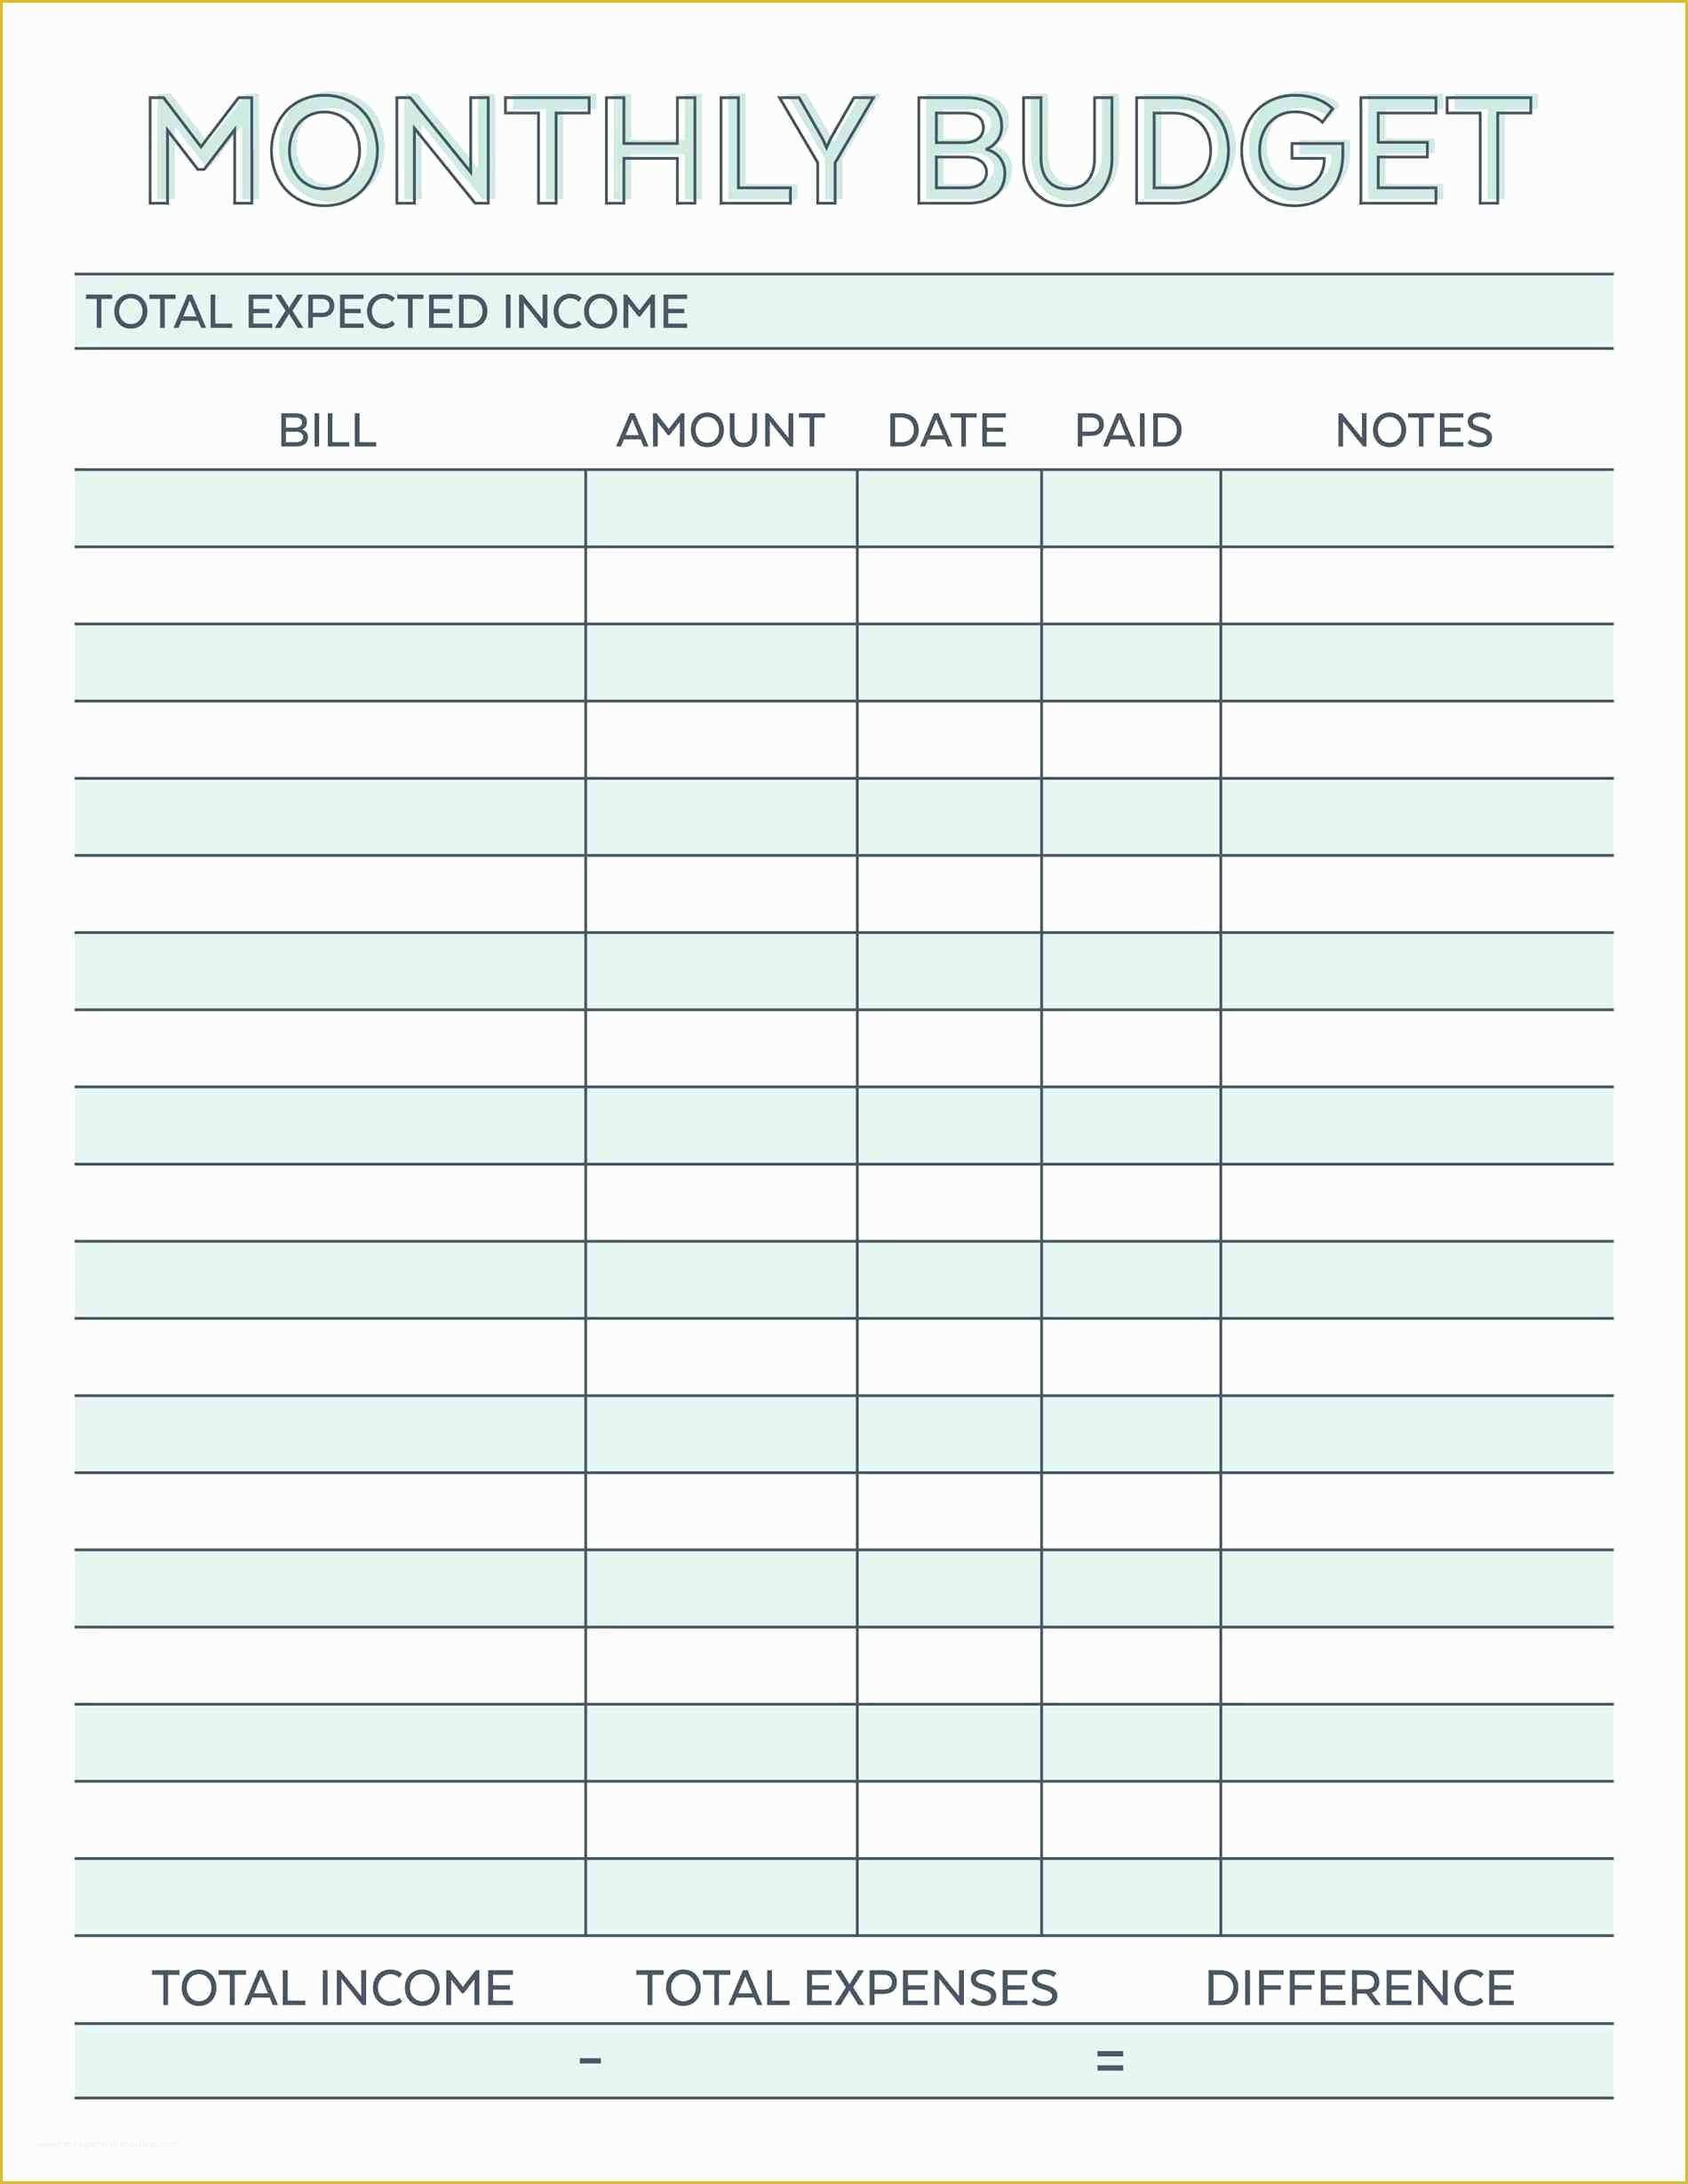 Monthly Budget Sheet Template Free Of Bud Planner Planner Worksheet Monthly Bills Template